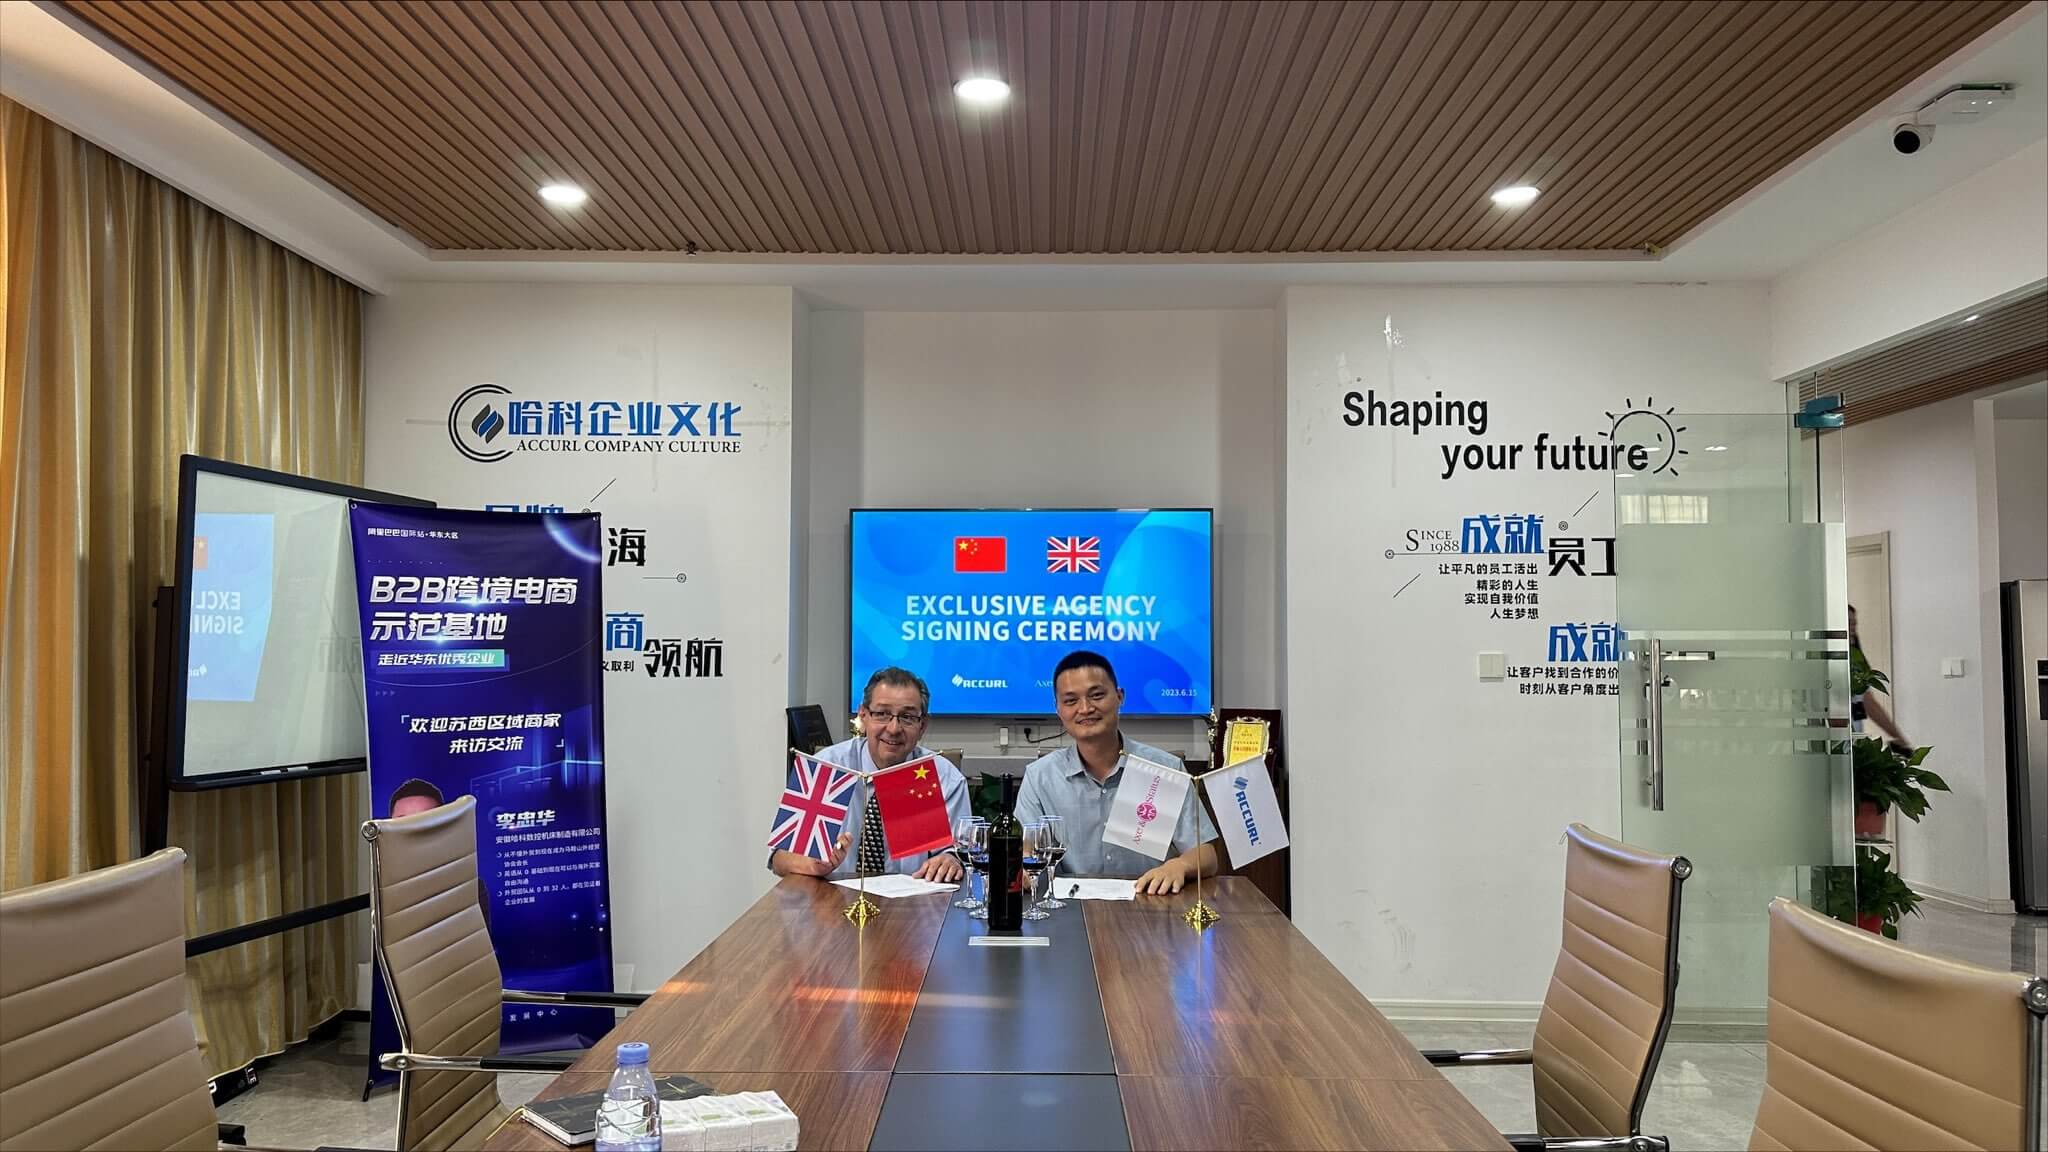 Axe & Status Machinery Ltd Partners With Accurl 1